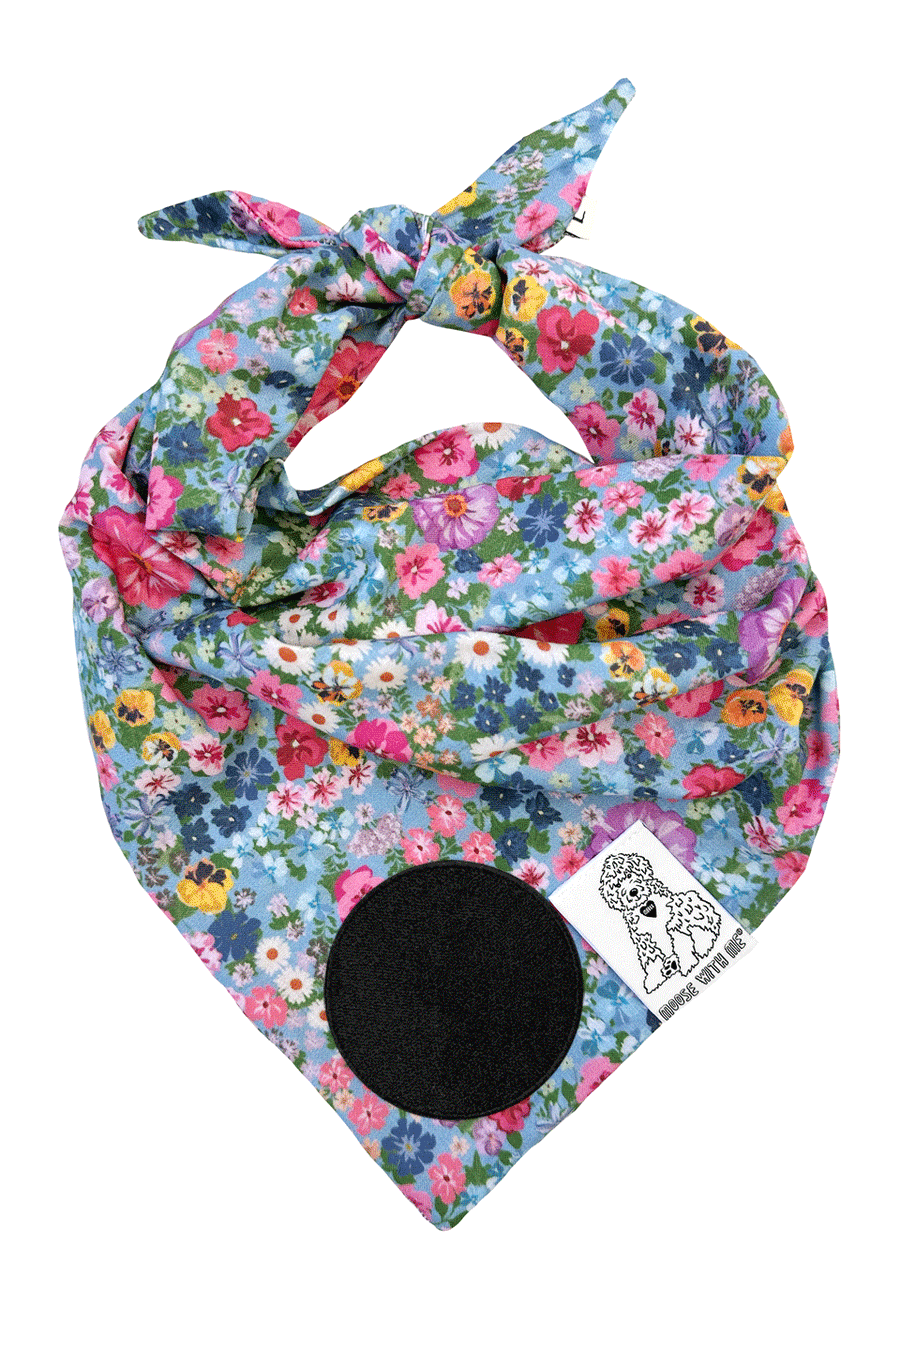 Dog Bandana Floral - Customize with Interchangeable Velcro Patches